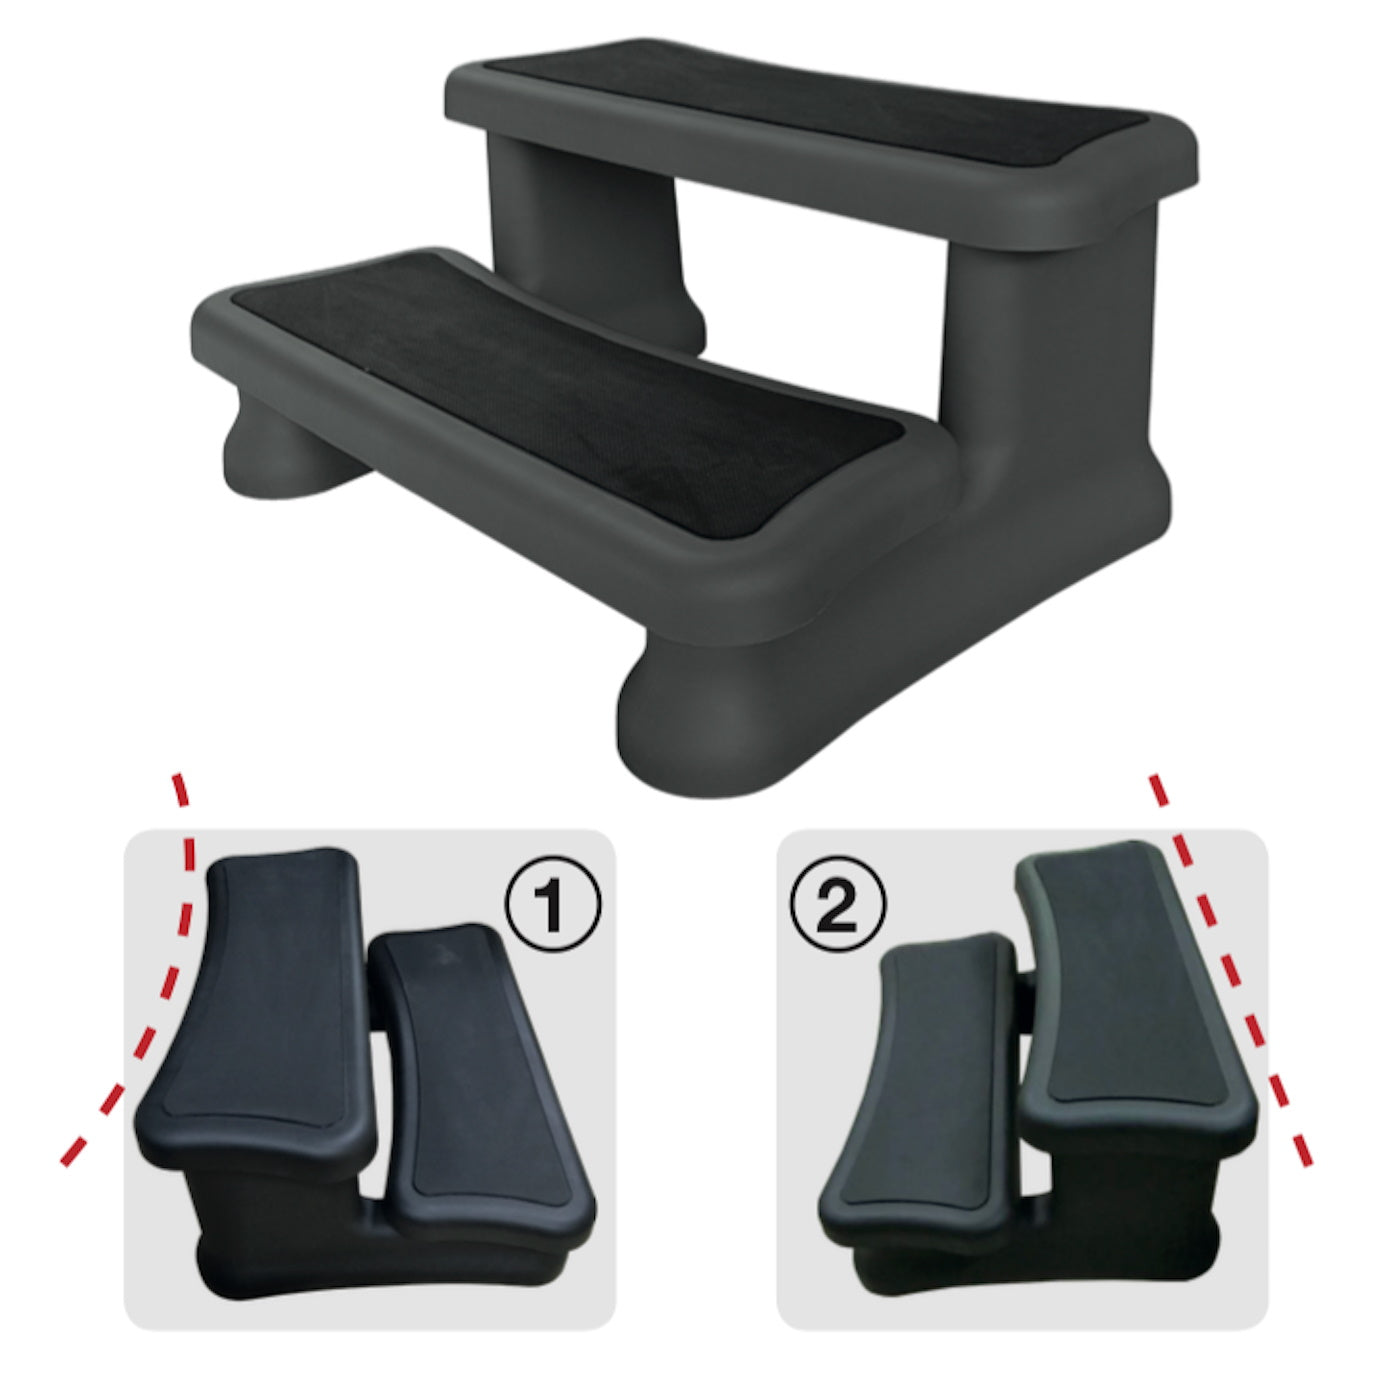 Canadian Spa Universal Spa Steps - Black - in a white background - KF-10061 - Vital Hydrotherapy